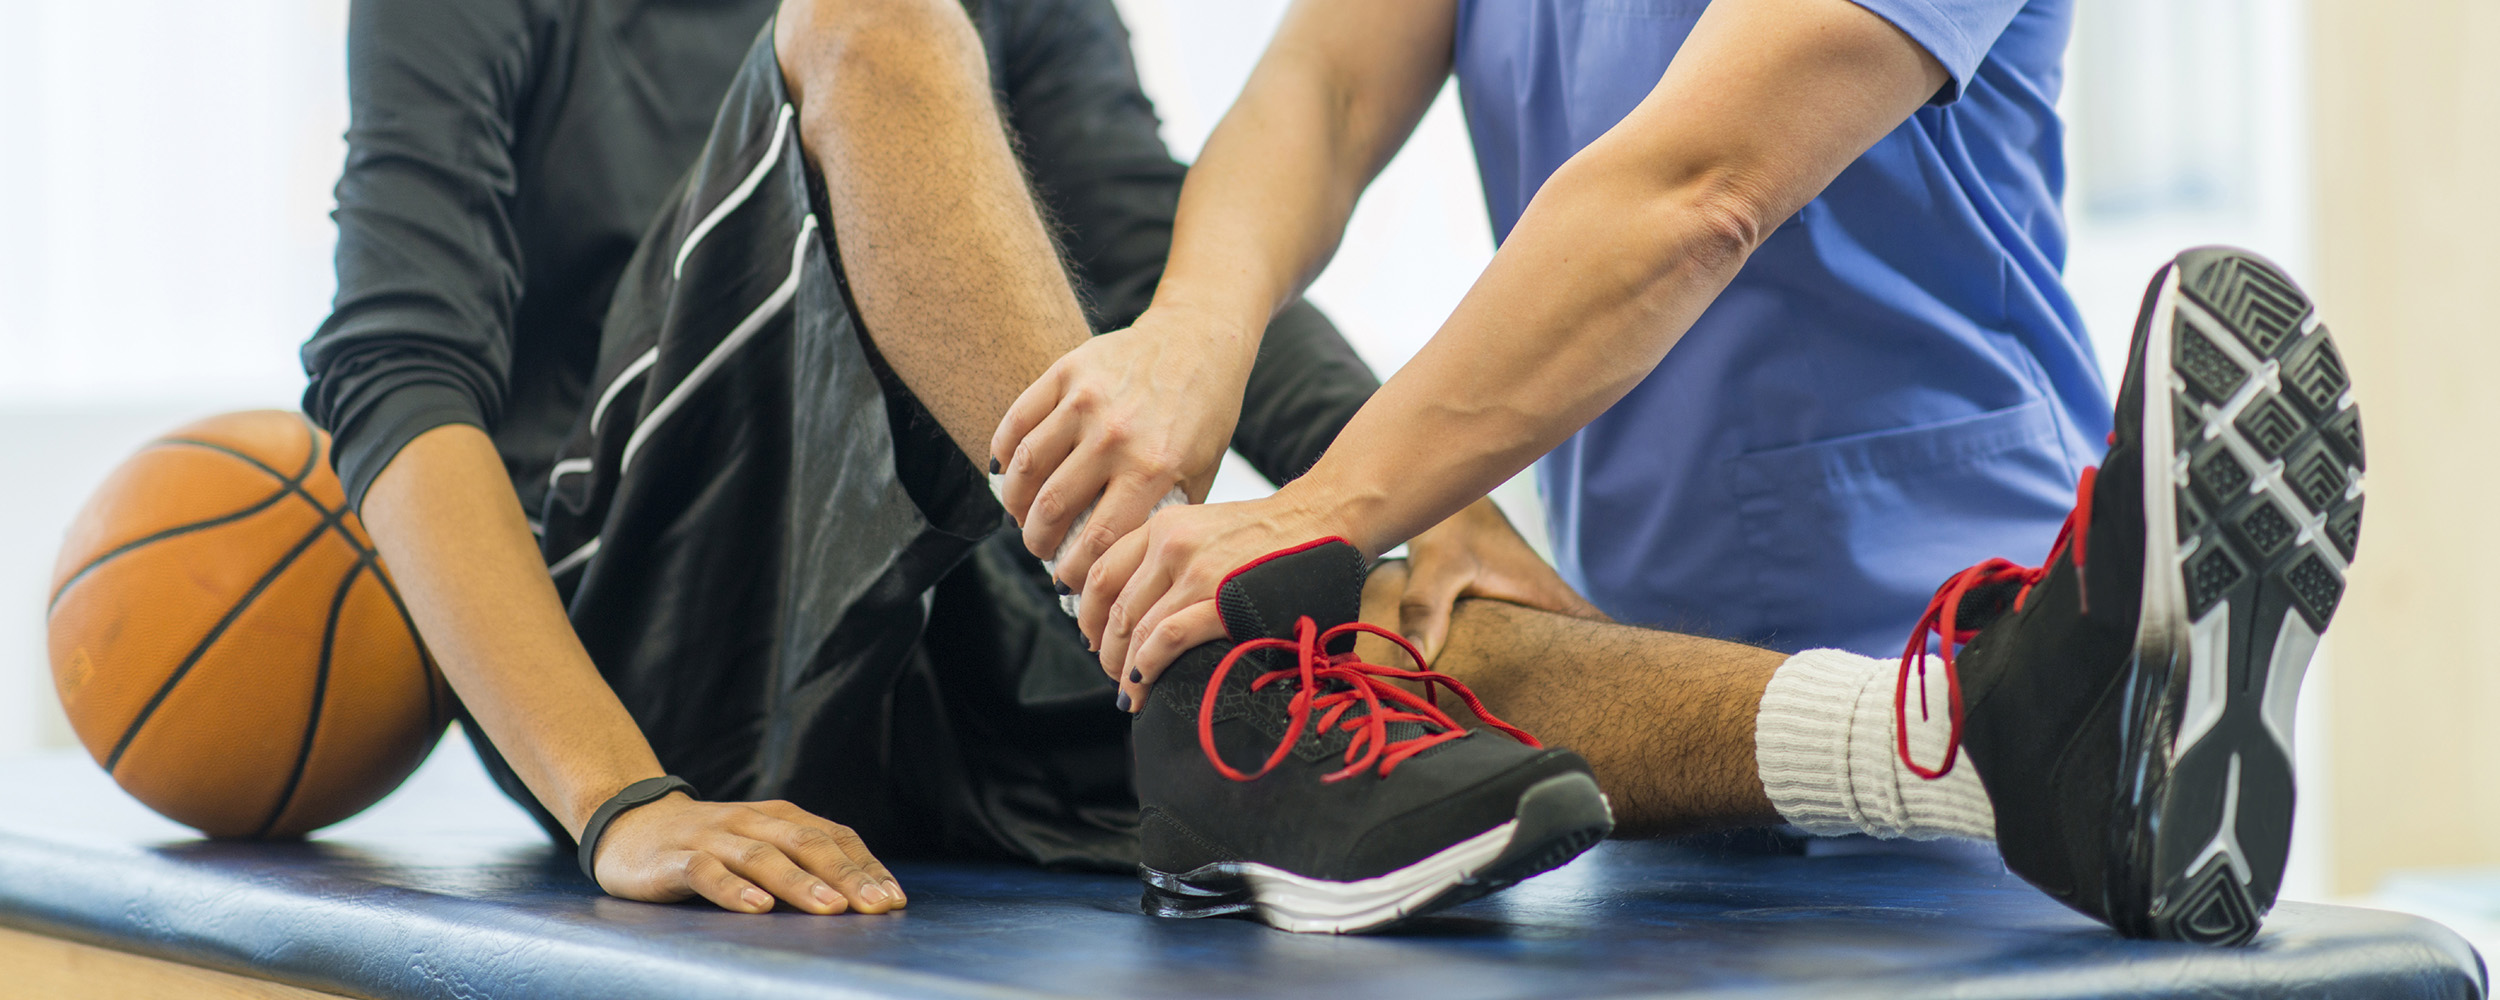 Bodies in Motion Physical Therapy Orthopedics